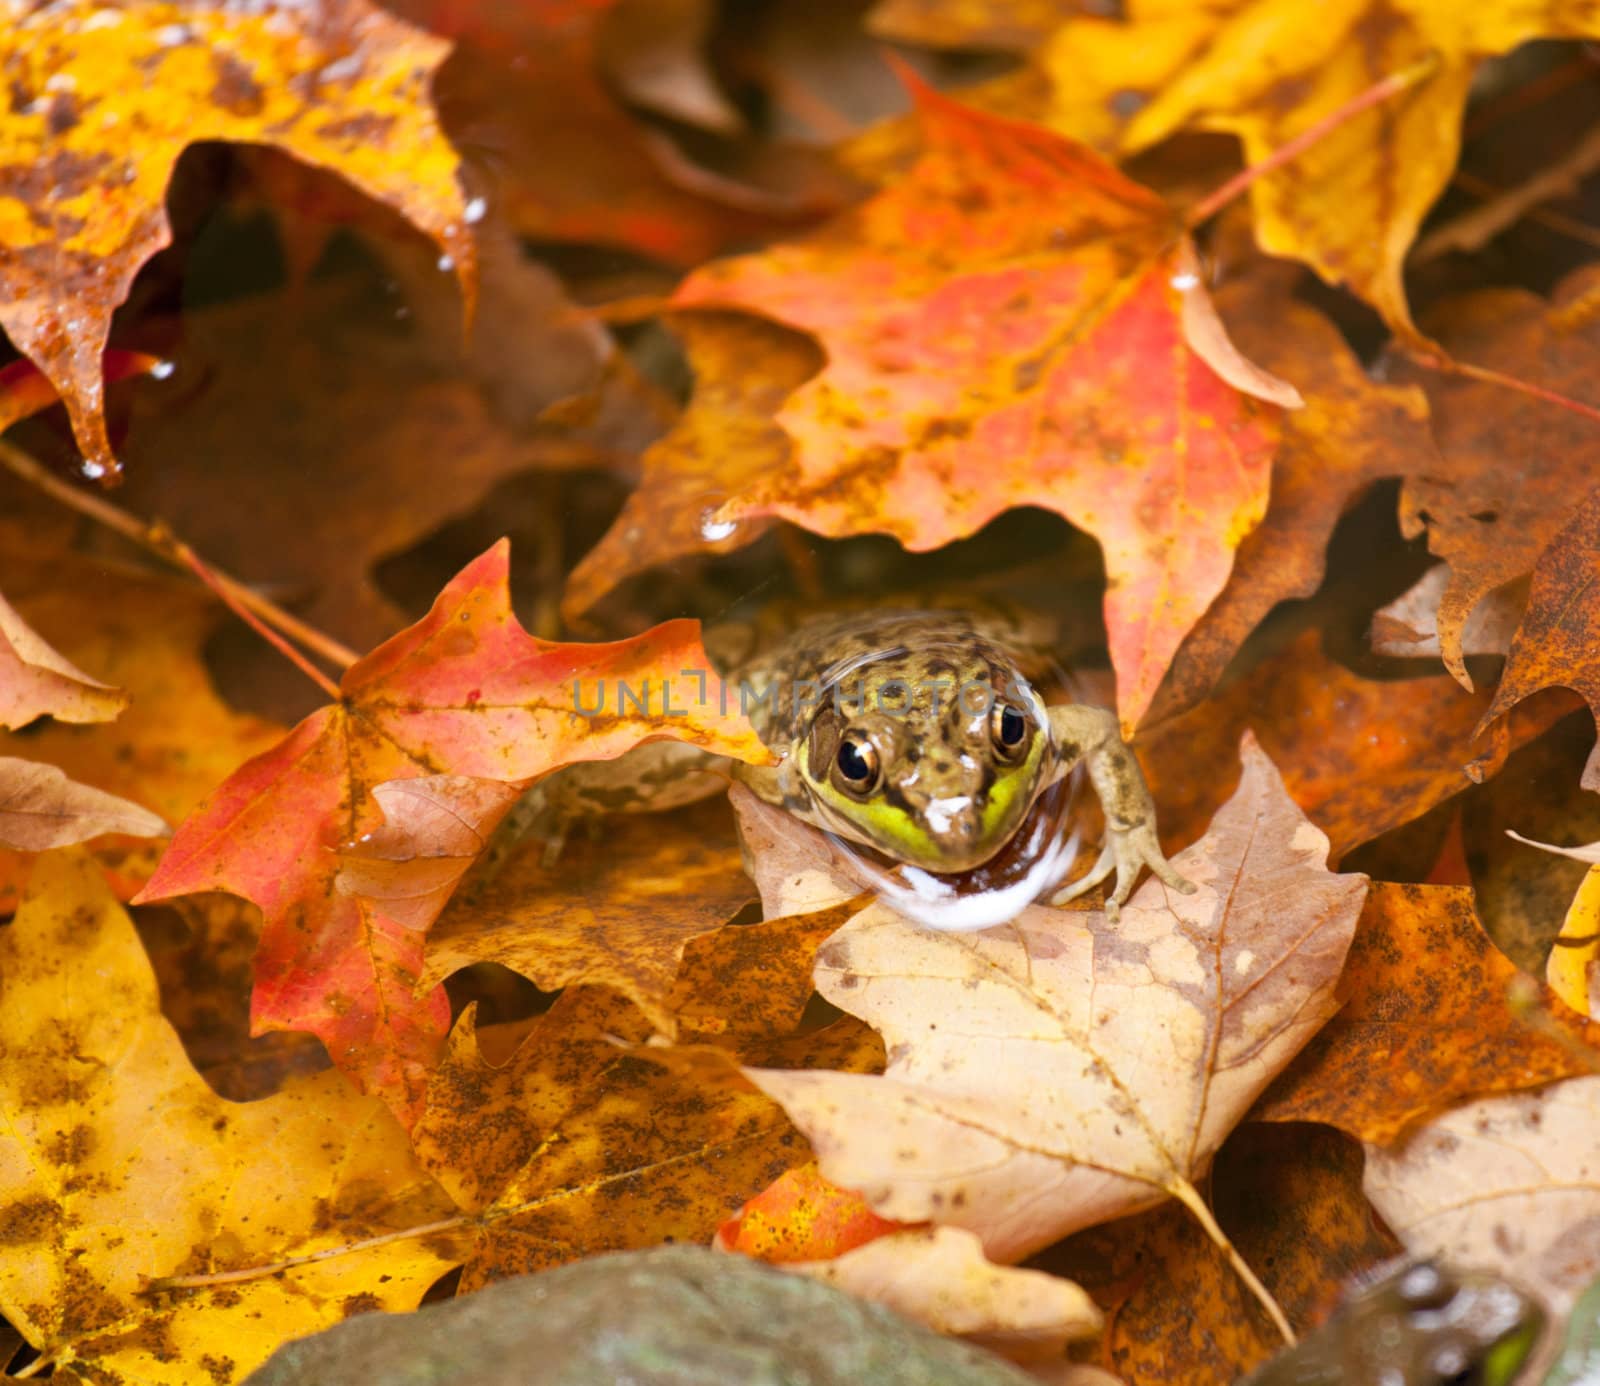 Frog deep in fall leaves by steheap